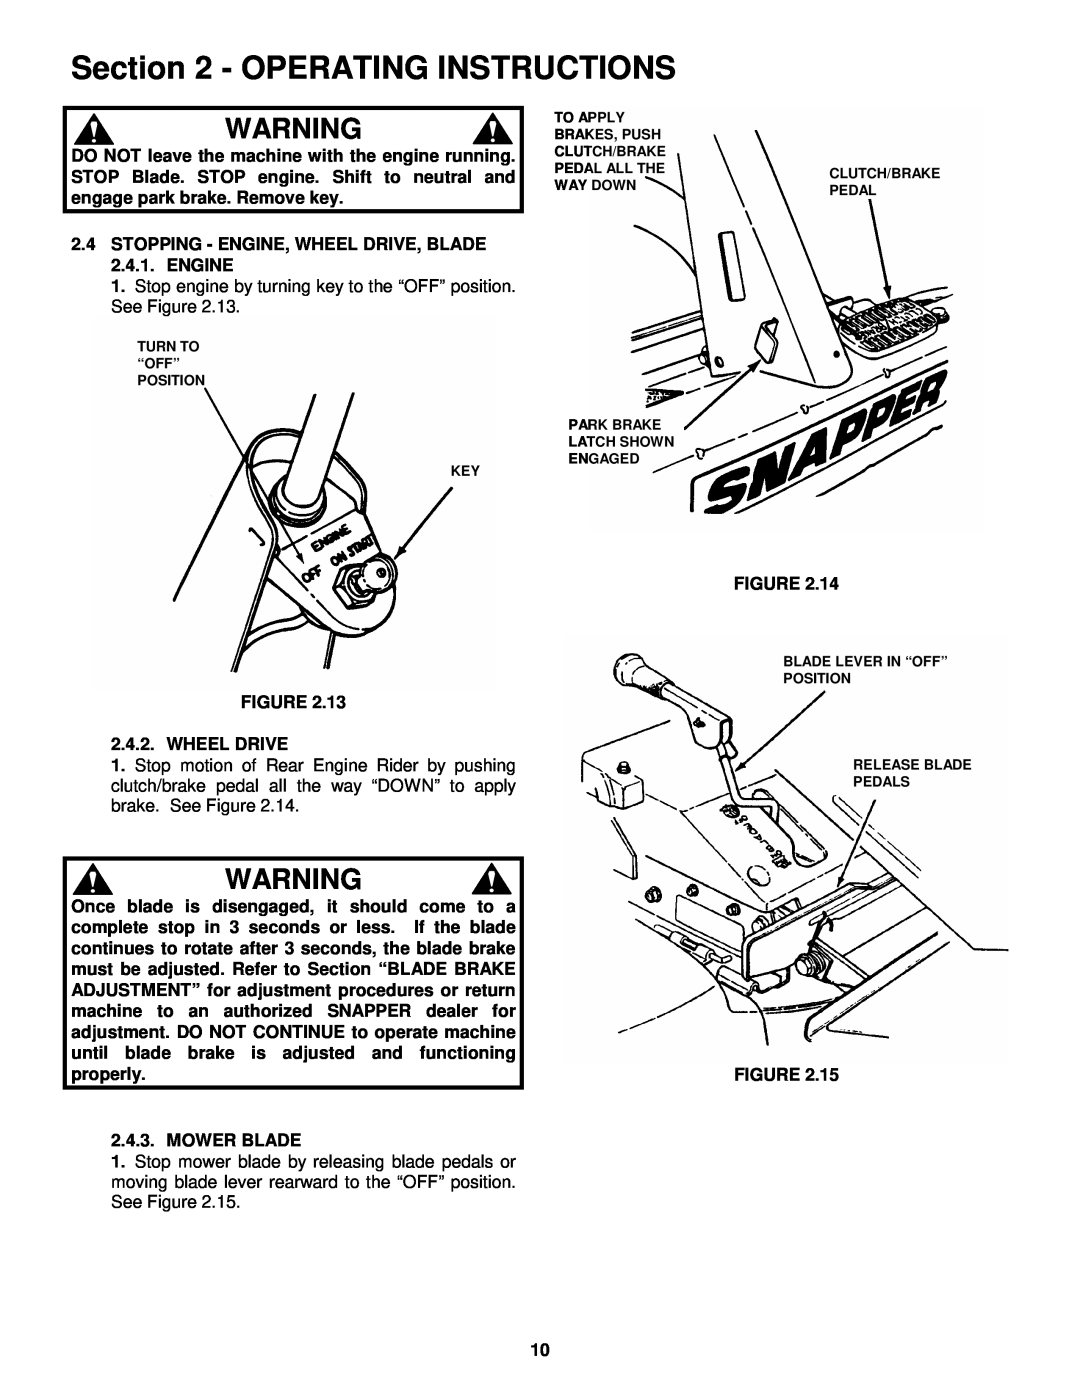 Snapper 281222BE, 331522KVE, 301222BE Operating Instructions, Stop engine by turning key to the “OFF” position. See Figure 